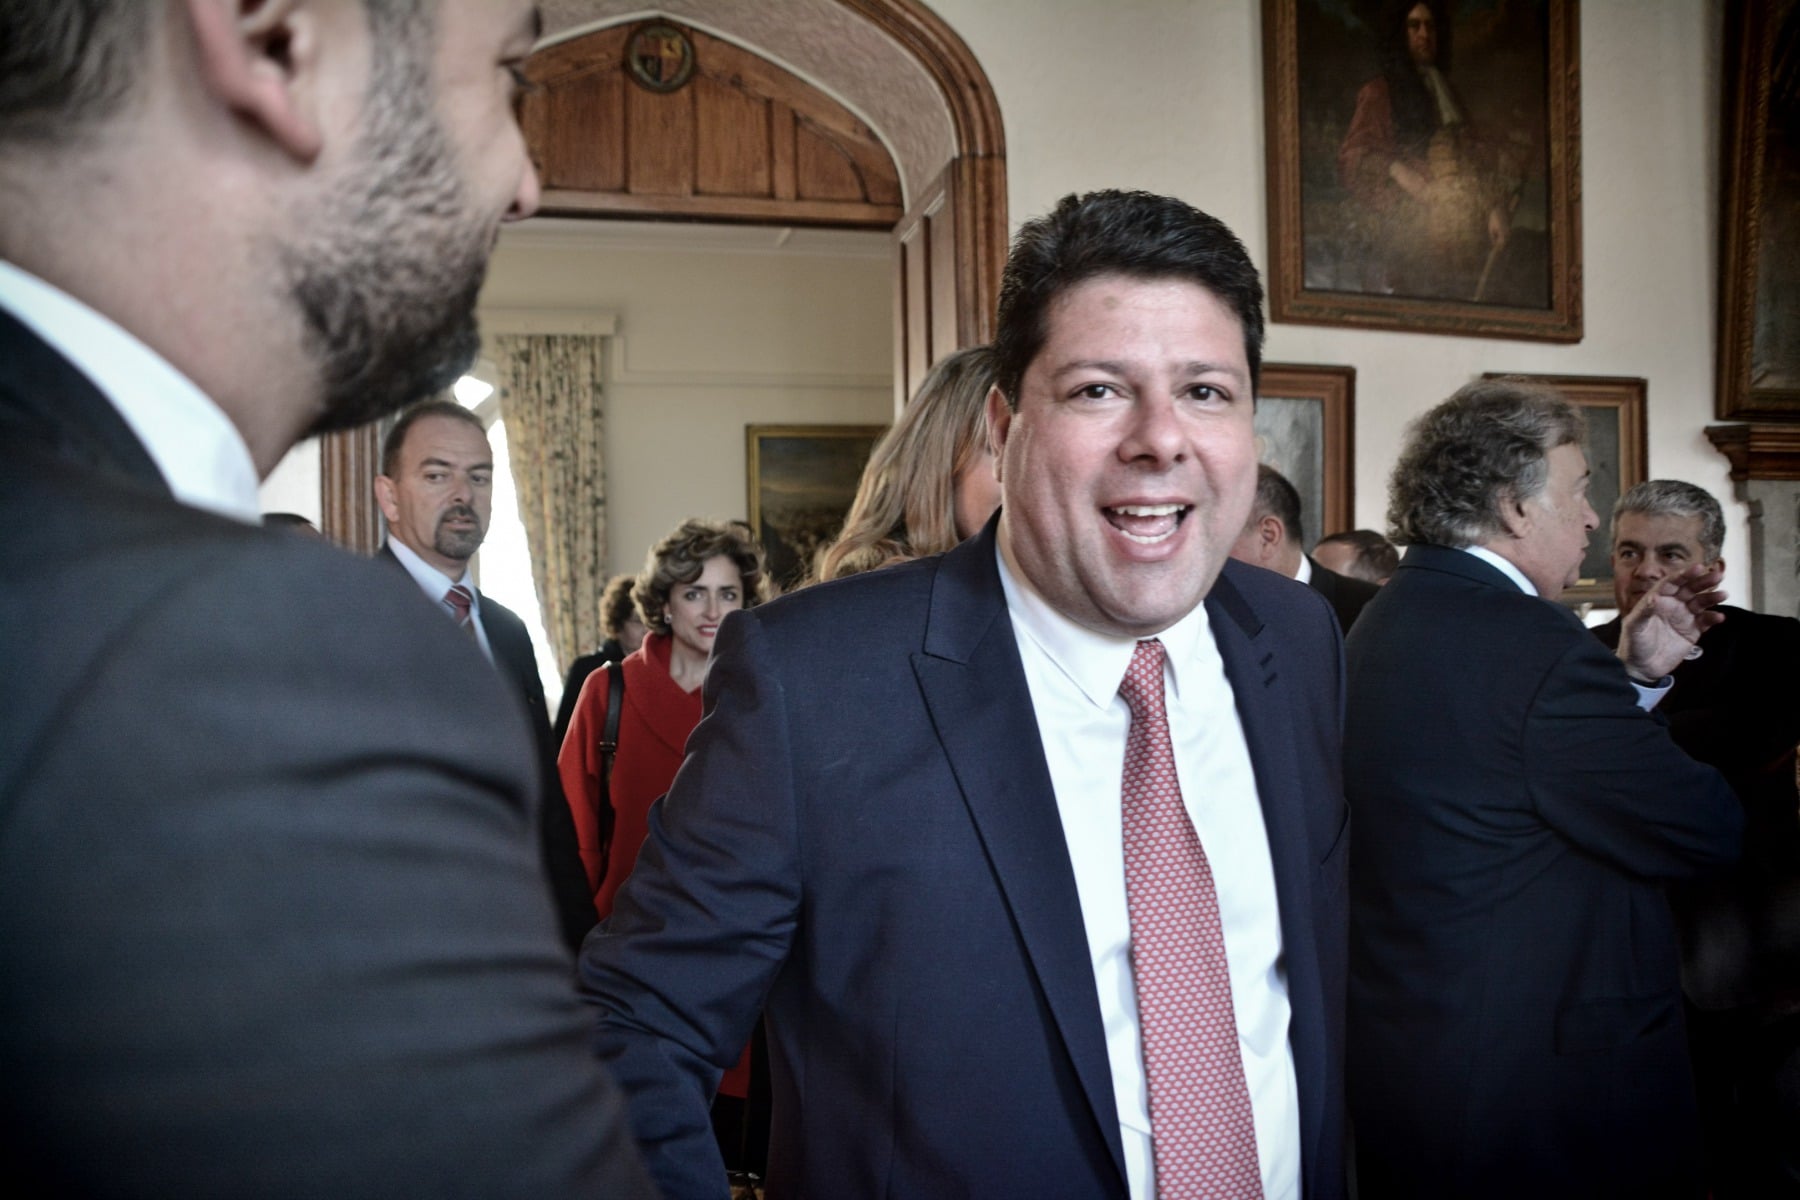 Gibraltar - 27th November 2015 - Fabian Picardo led his GSLP/LiberalAlliance Ministers to the Convent earlier this morning where there were sworn into Government by Acting Governor Alison Macmilan. He and his team then headed to Number Six where they held their first press call as the newly formed Government following a landslide victory.